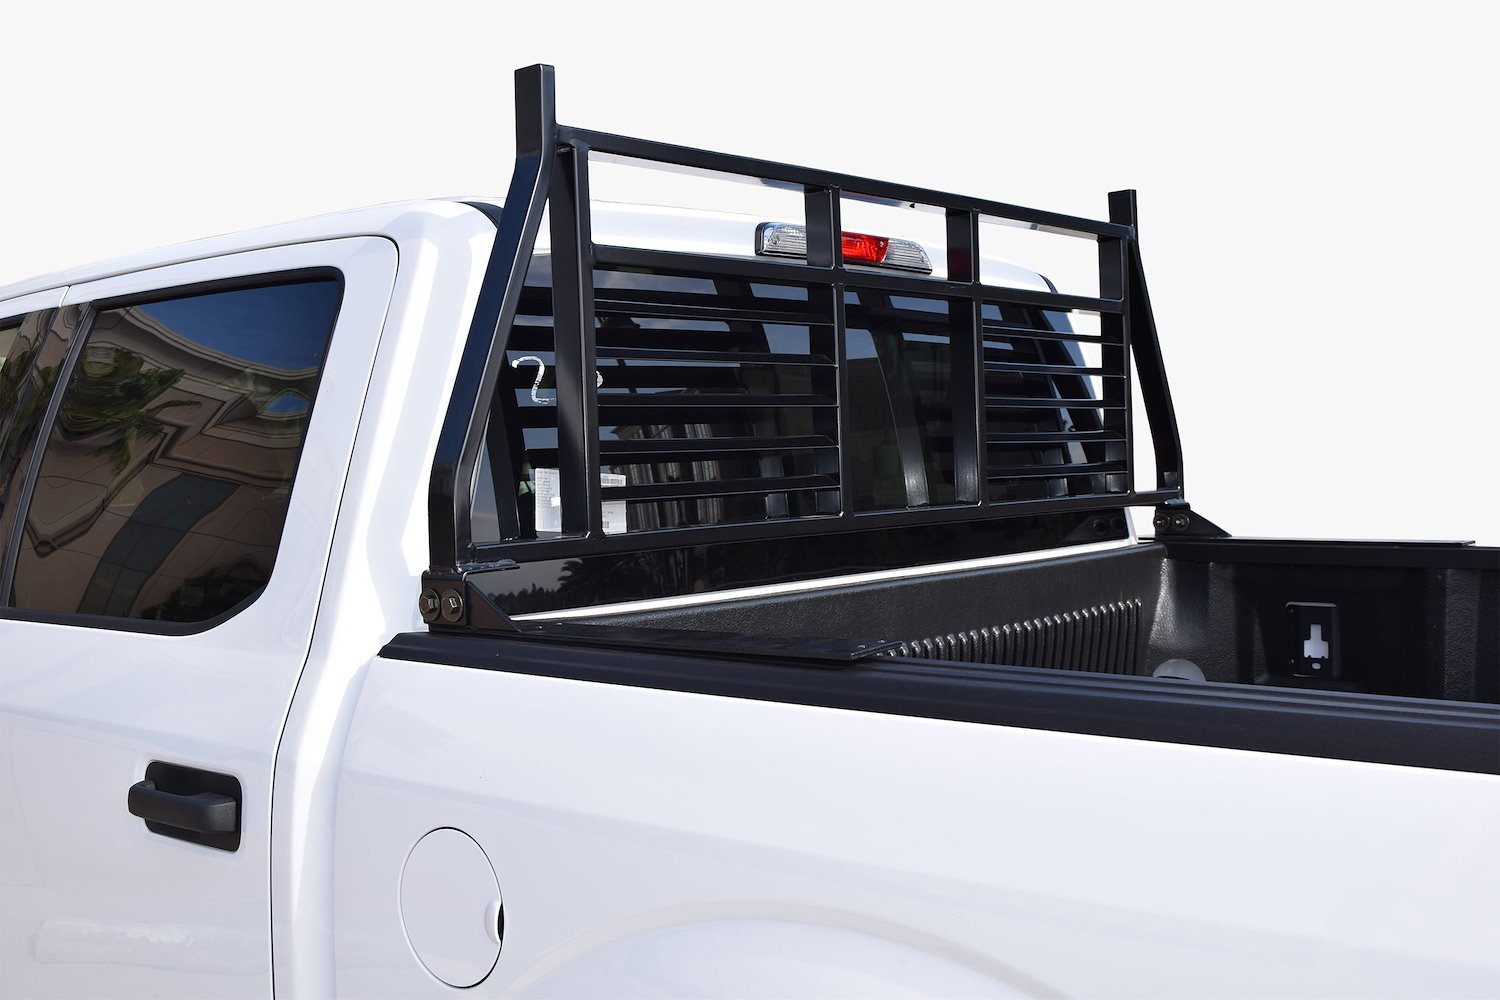 Headache rack enhances work truck appearance while maintaining the right amount of protection. Featu